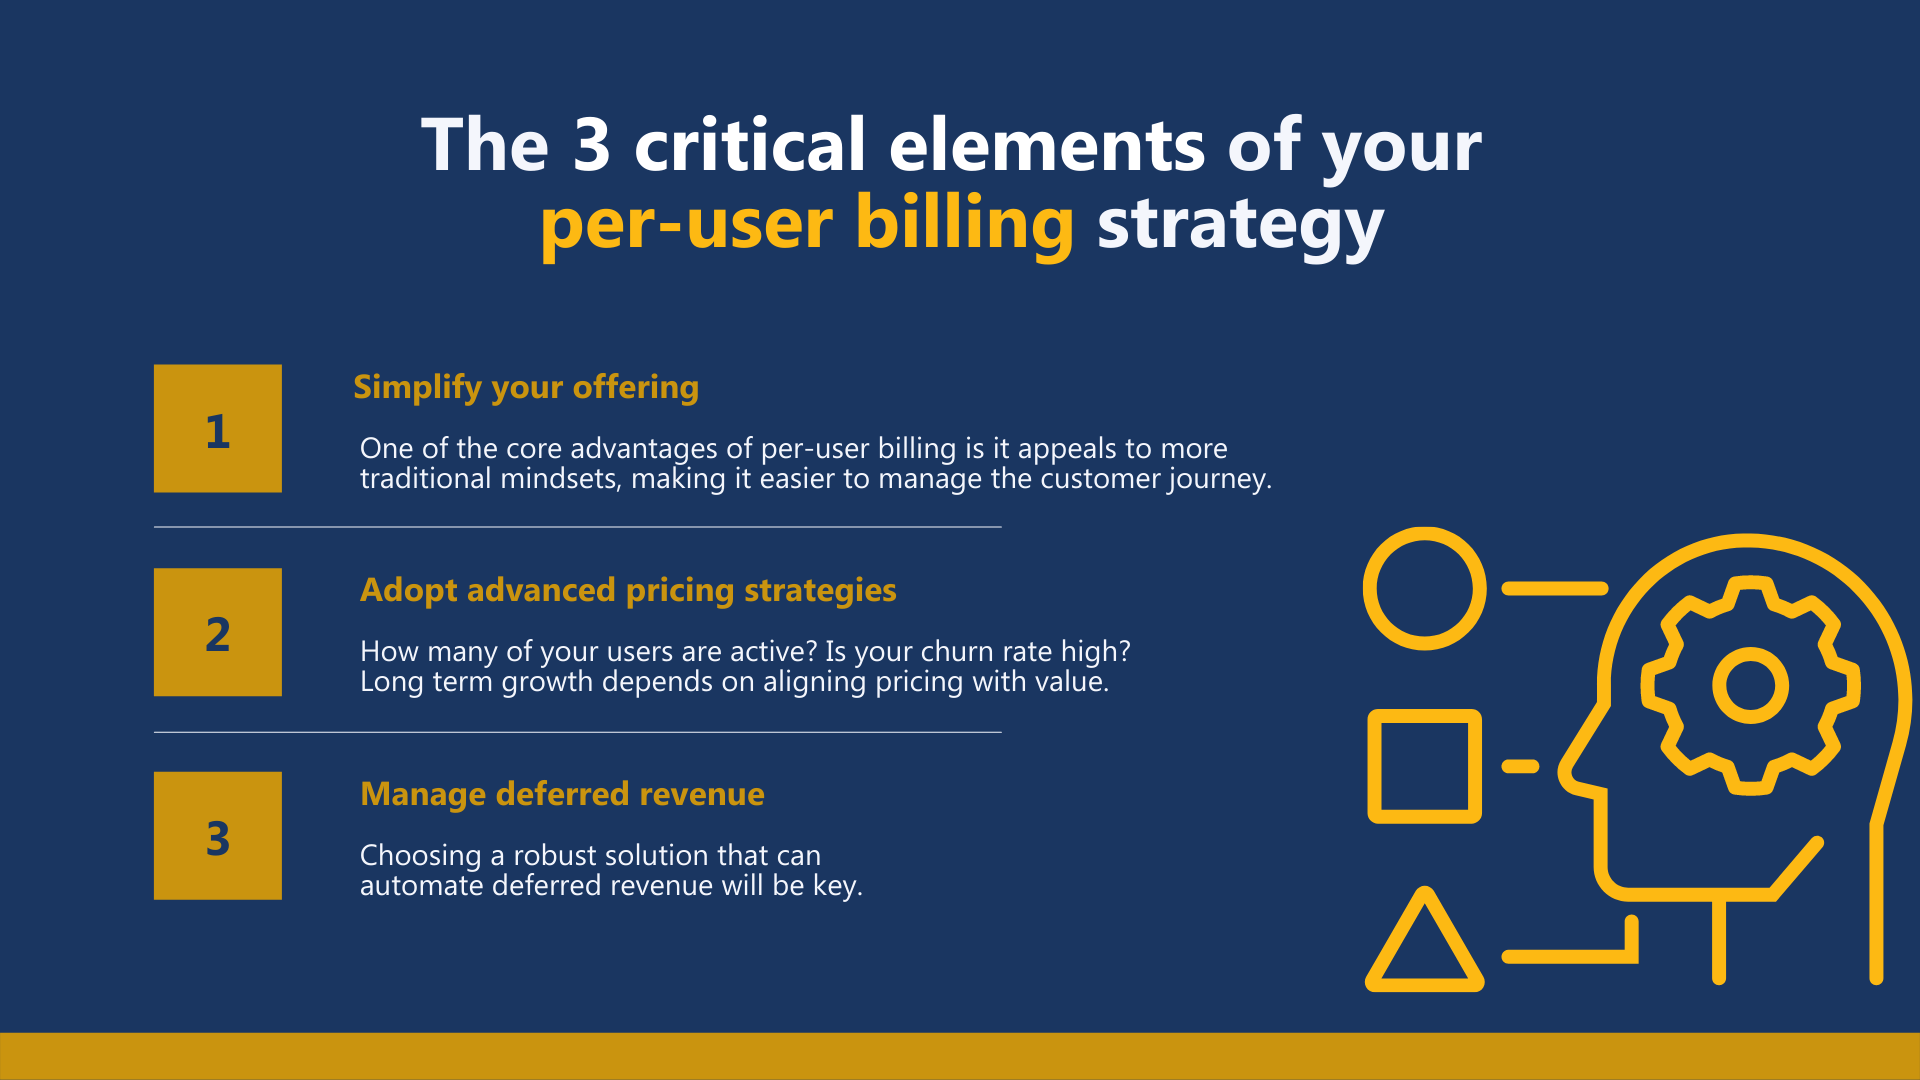 Three critical elements of your per-user billing strategy